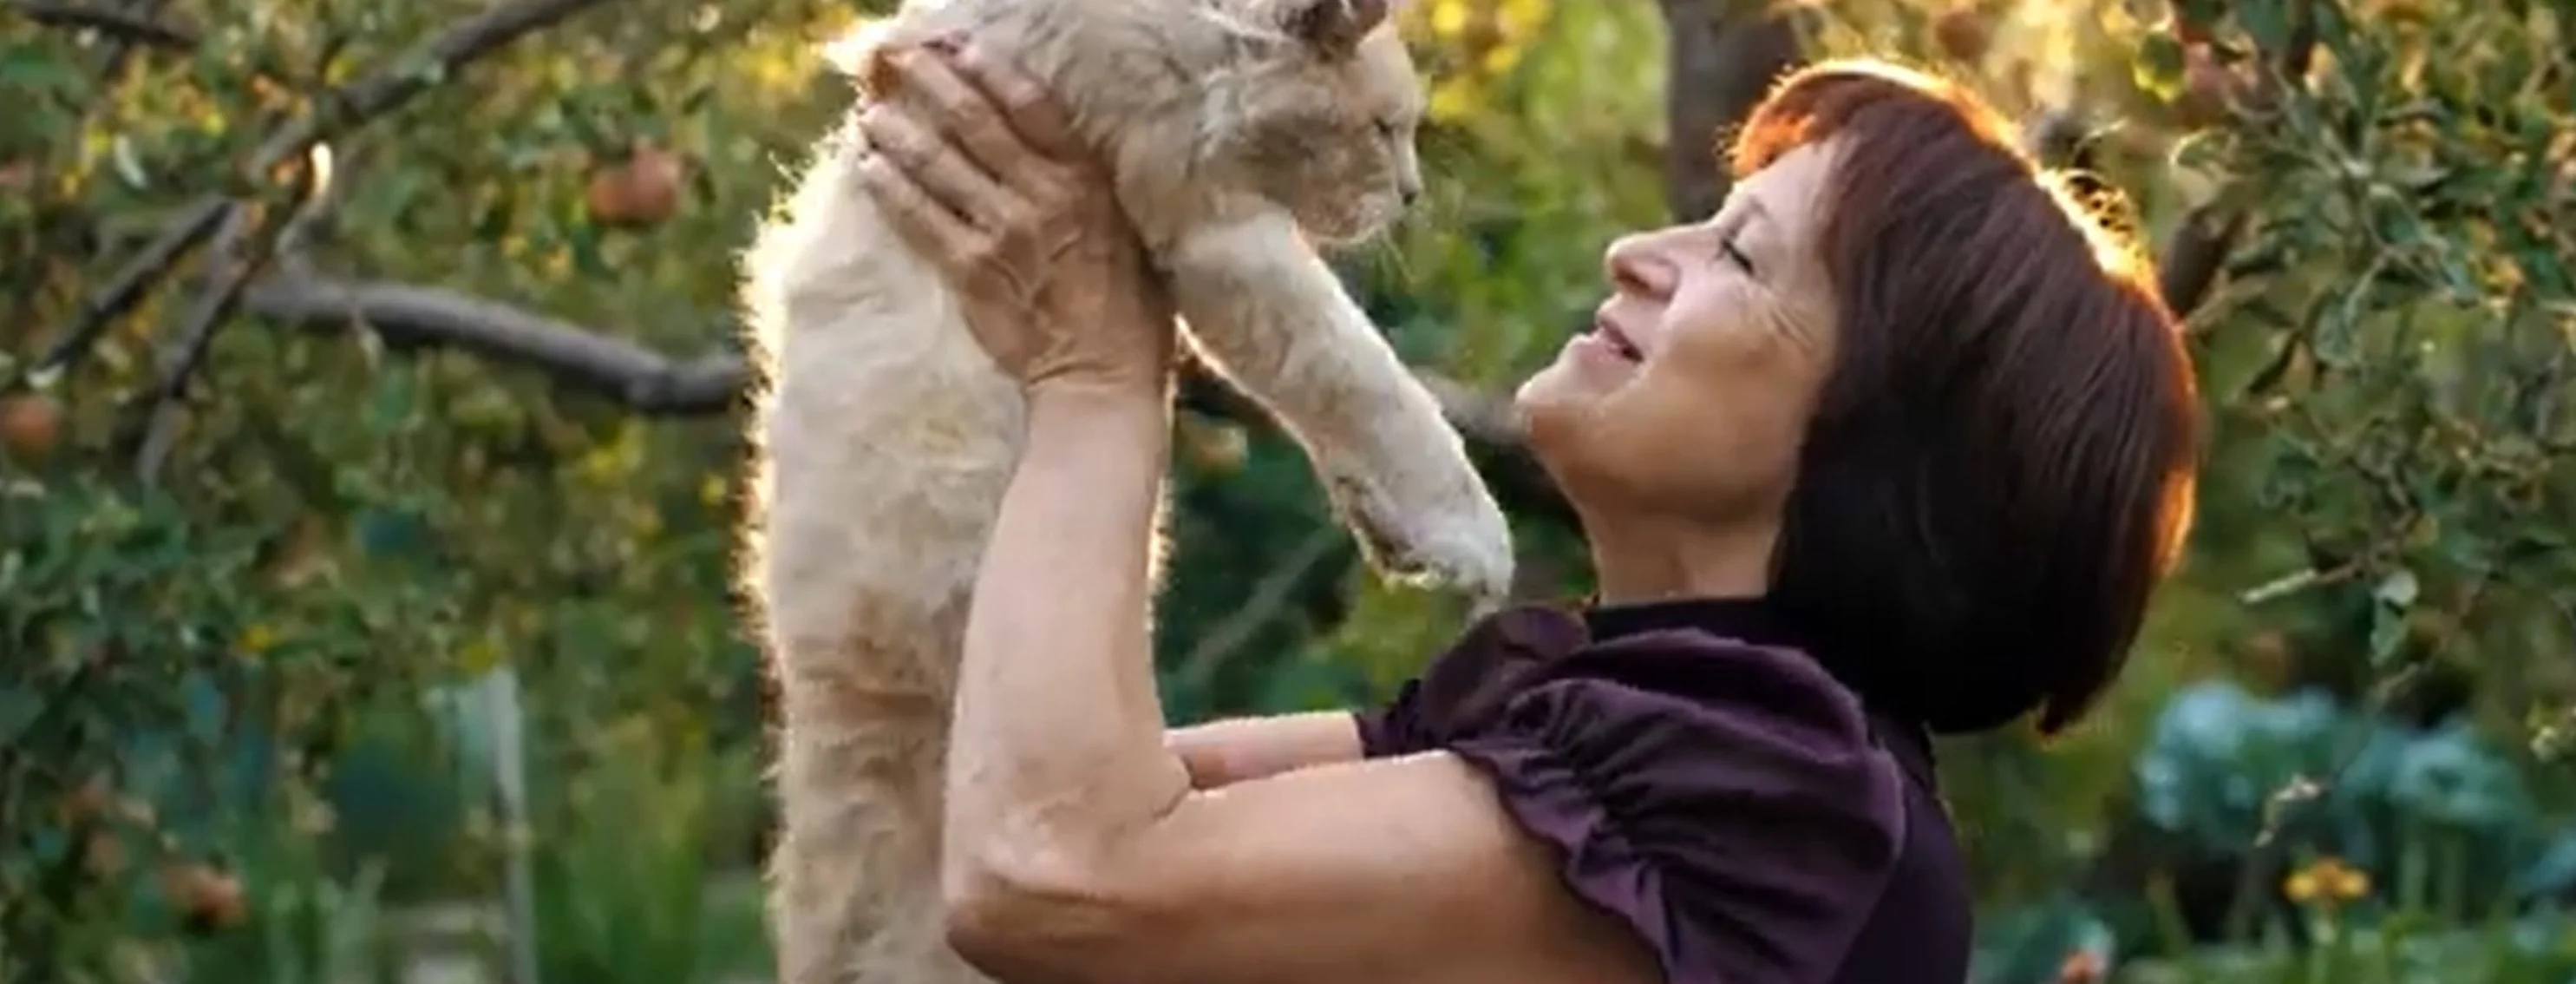 Lady holding cat in air